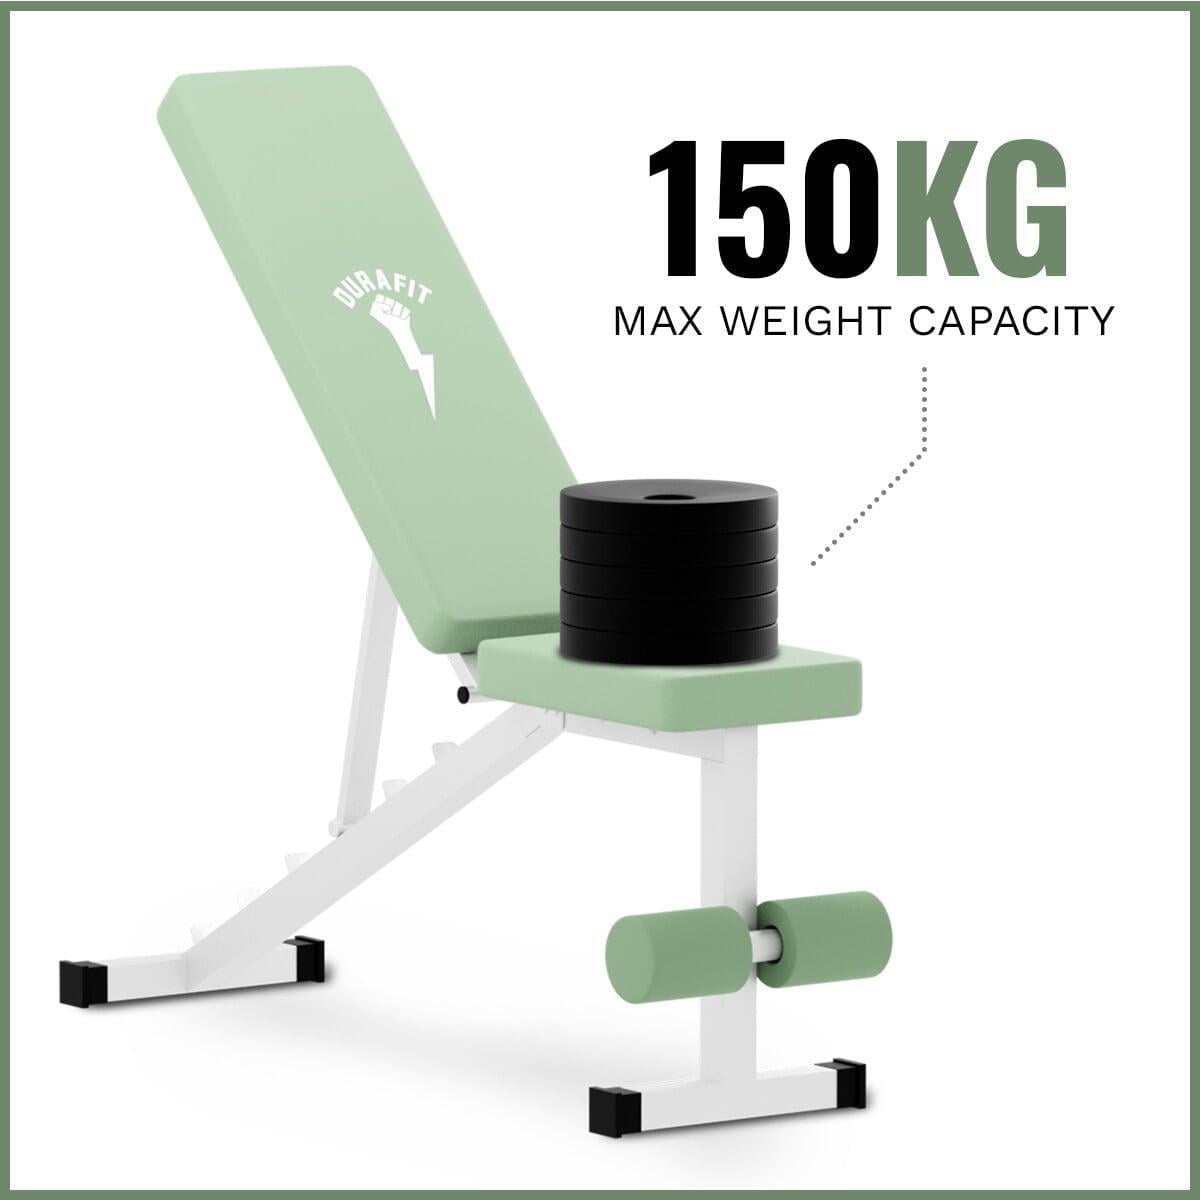 Durafit Foldable Bench FB01 with Max user Weight 150kg